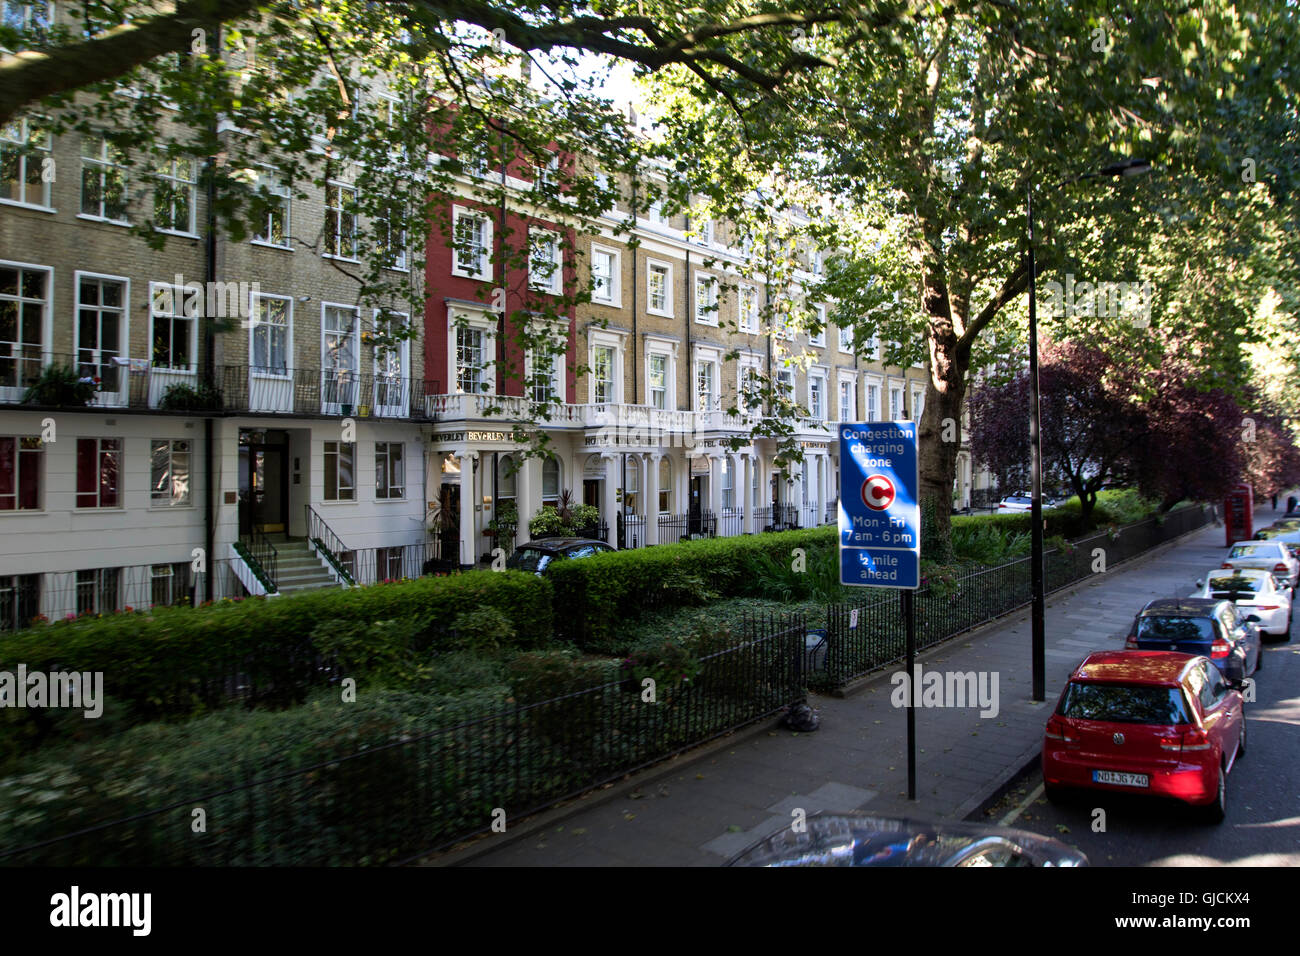 Olympic House Hotel off Edgware Road, W2 2EH, a major road through north  west London Stock Photo - Alamy